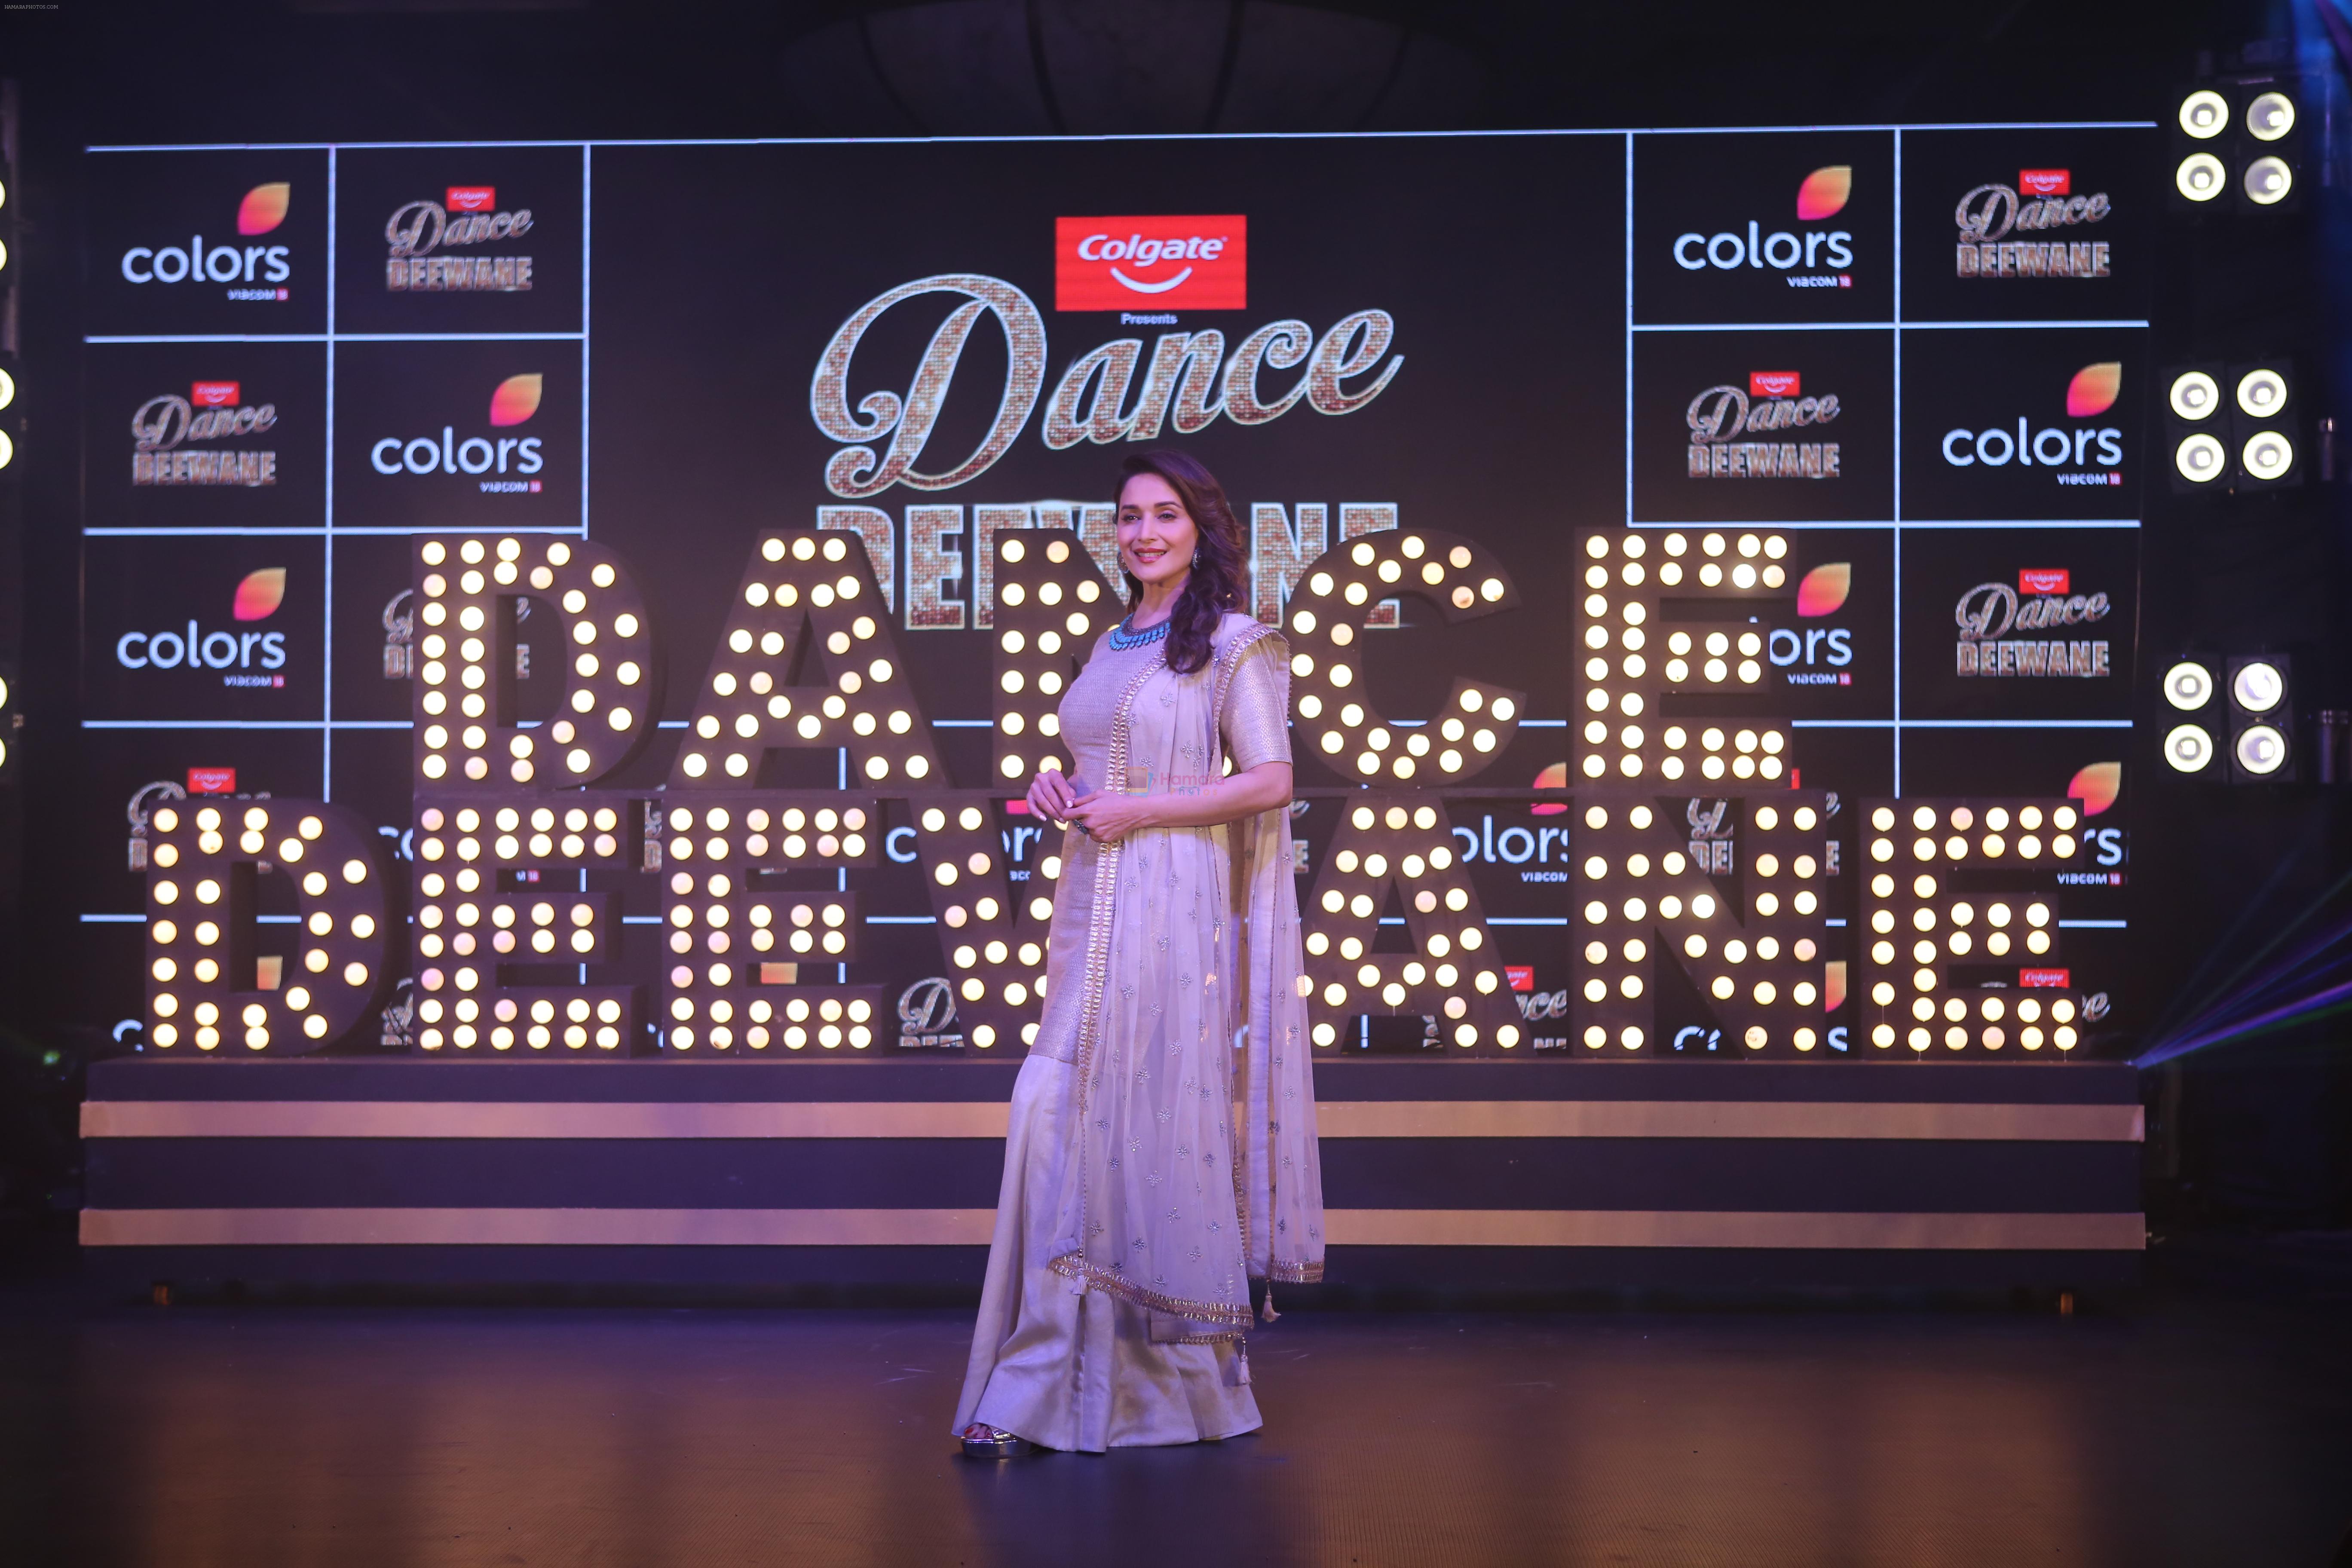 Madhuri Dixit at the launch of colors show Dance Deewane at jw marriott juhu on 26th May 2019